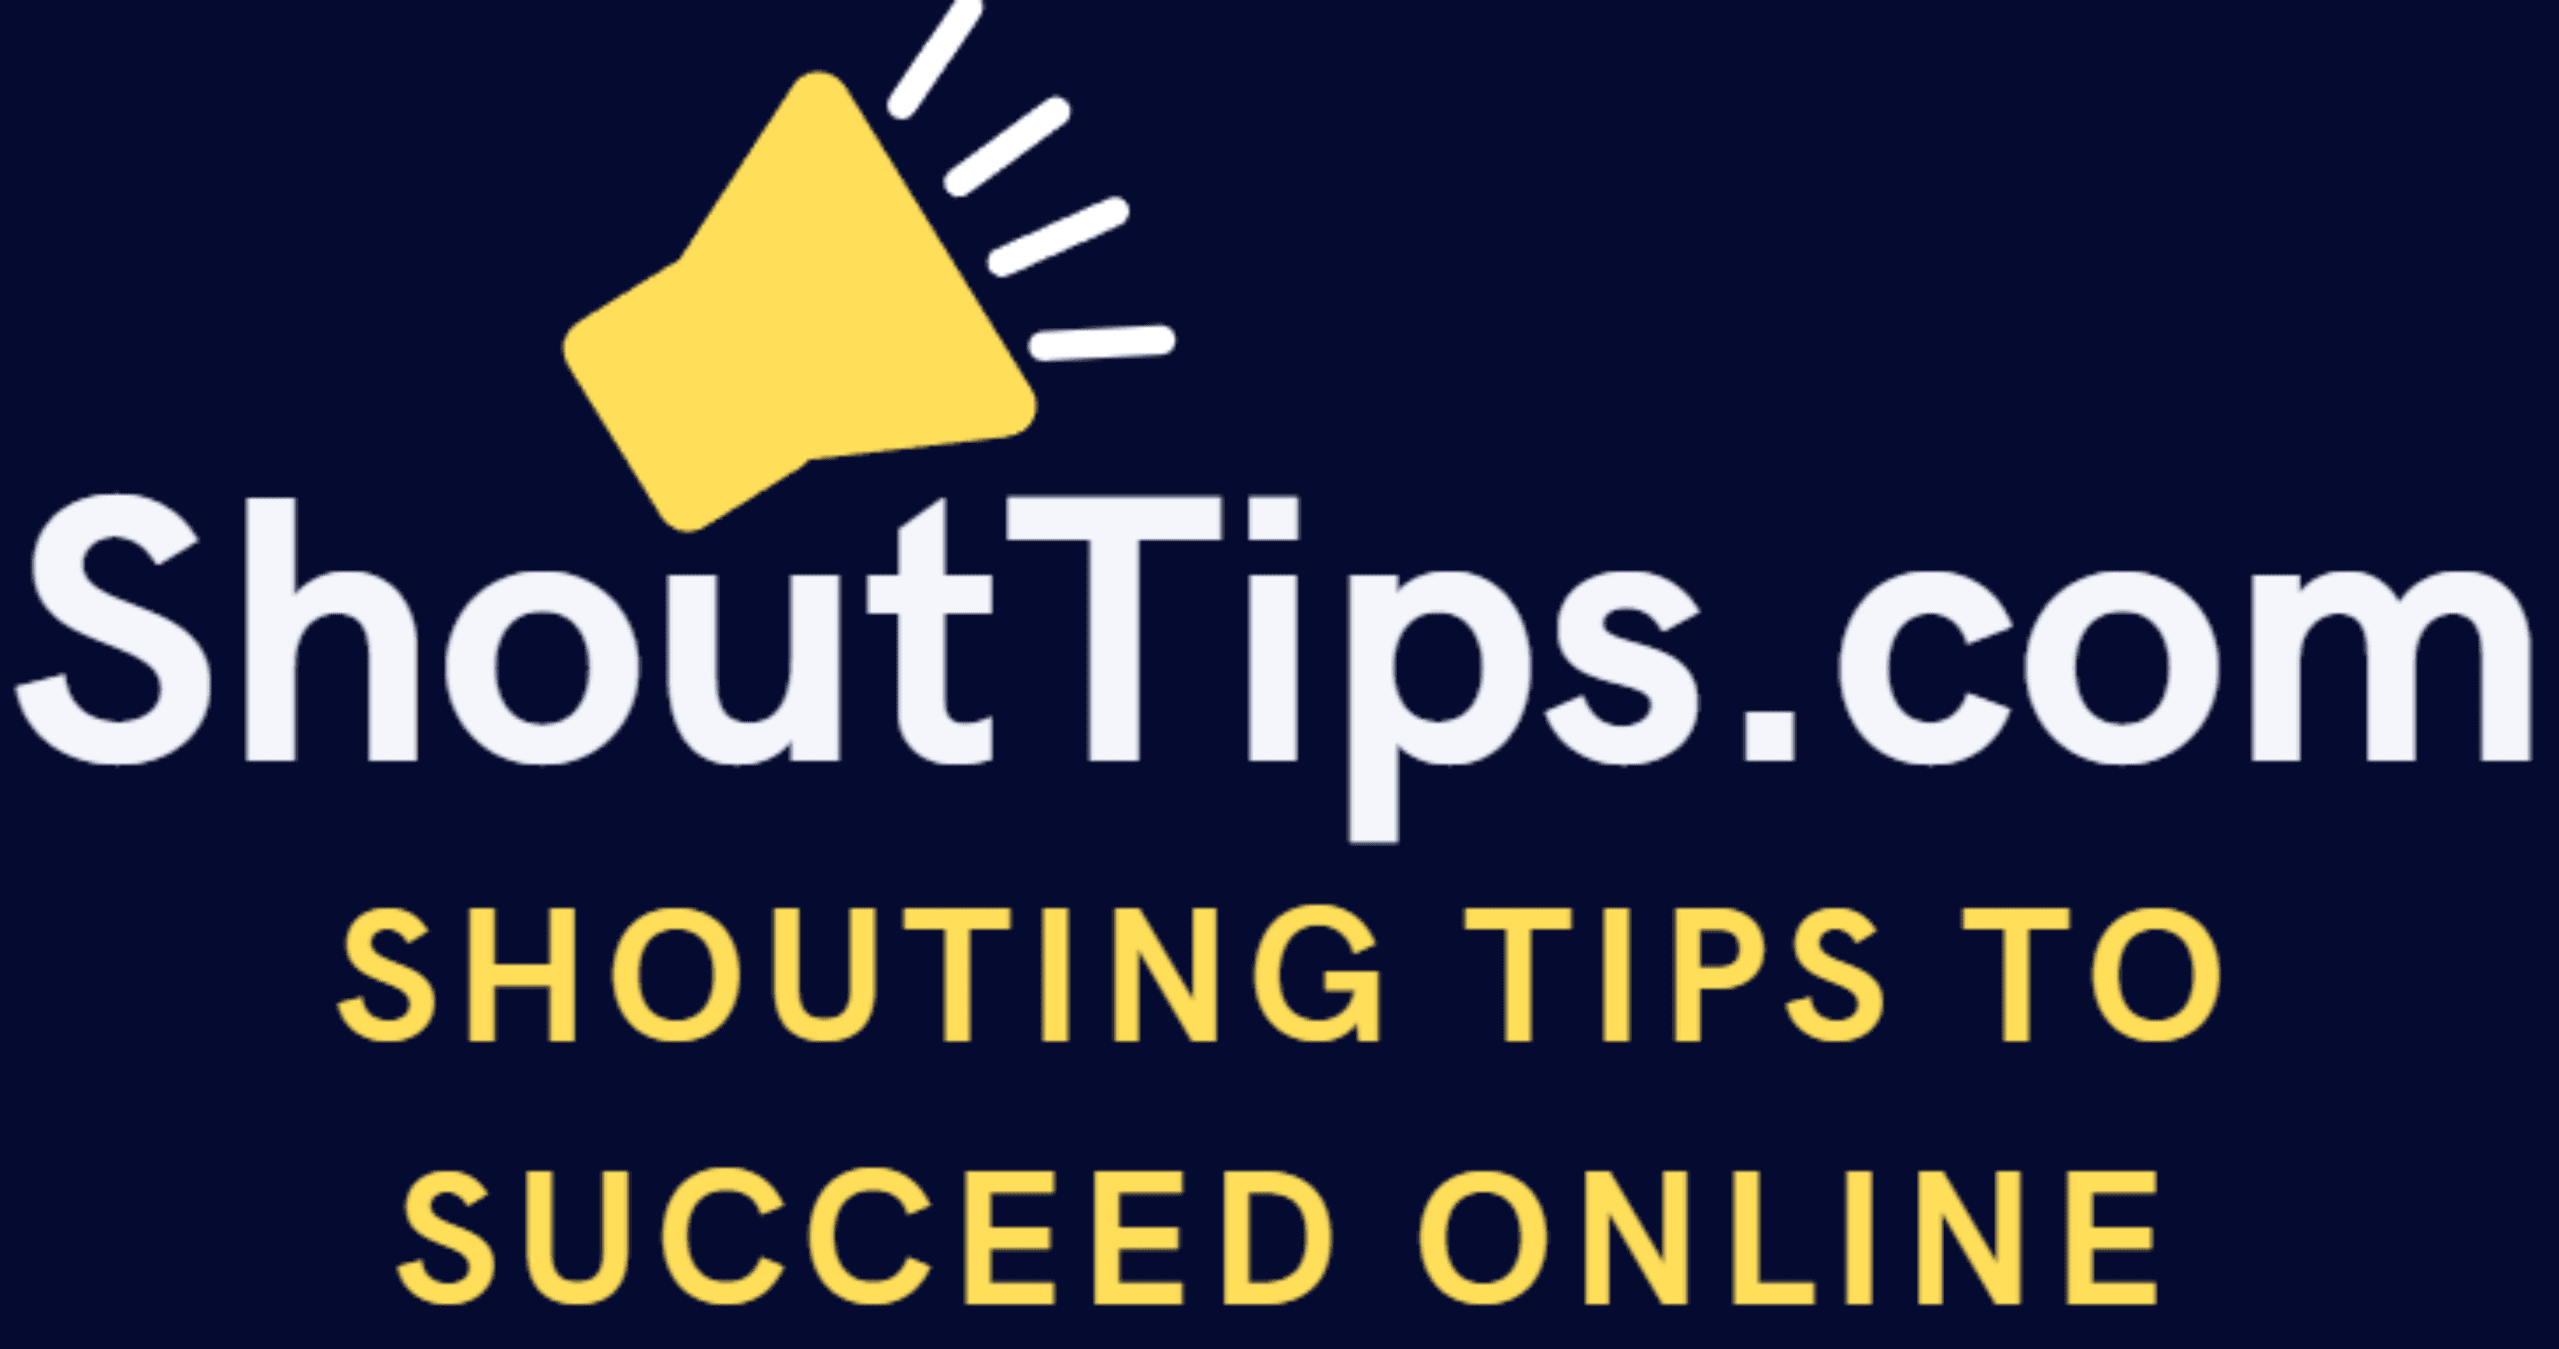 Shouting Tips To Succeed Online